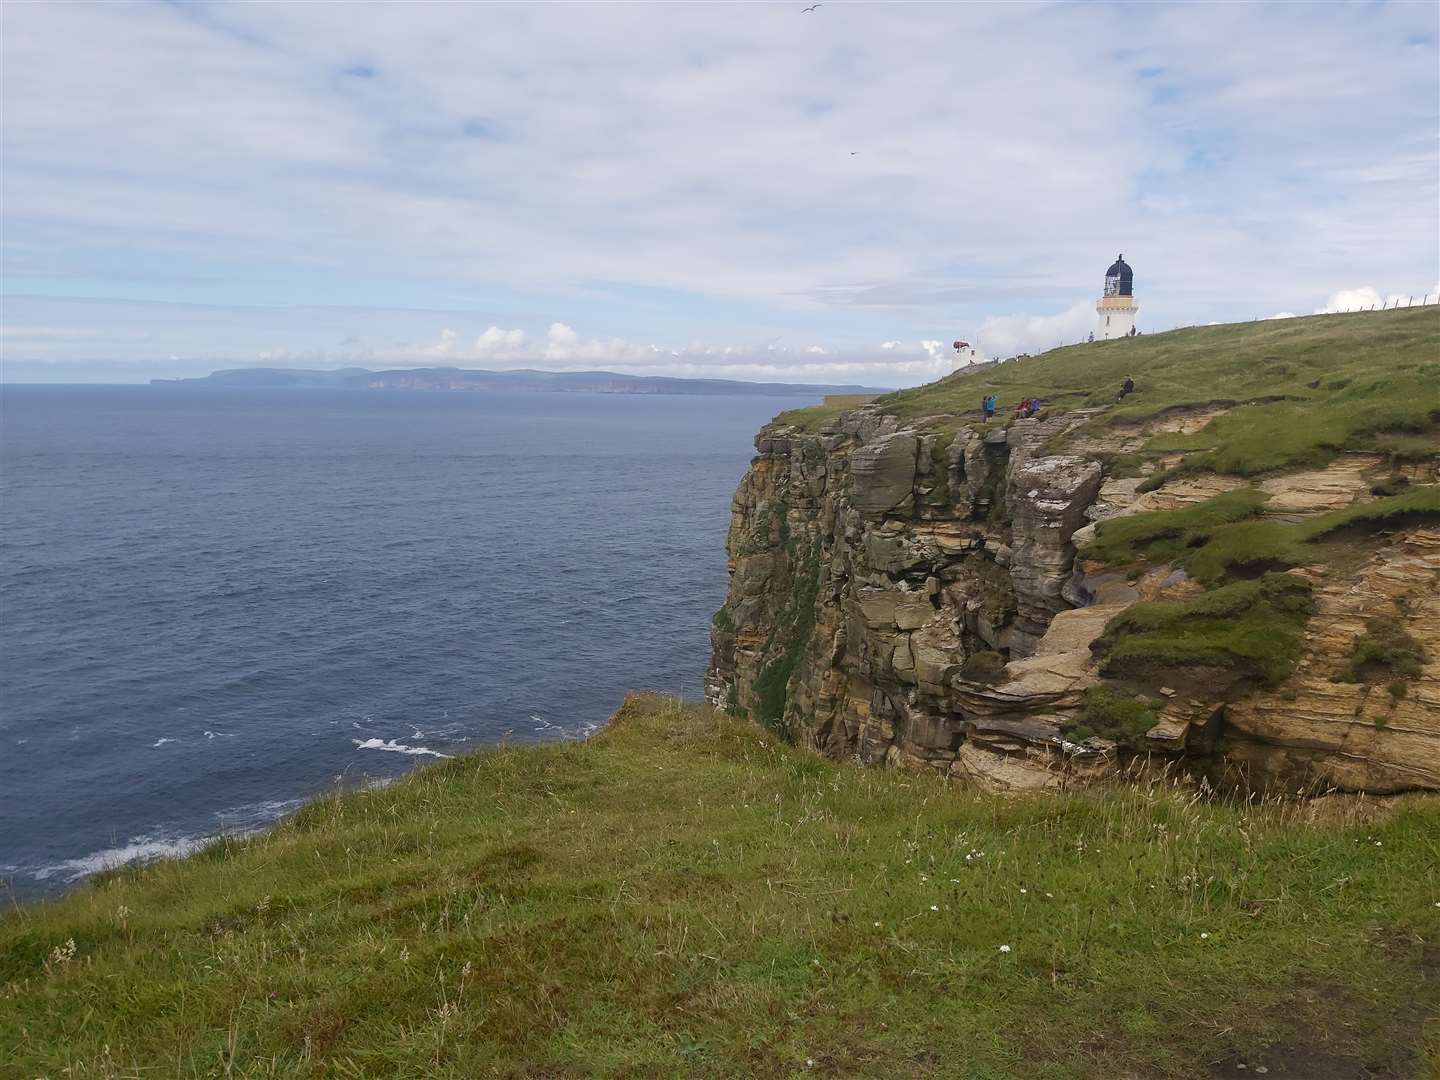 Dunnet Head is the most northerly point in the UK mainland and a haven for wildlife.